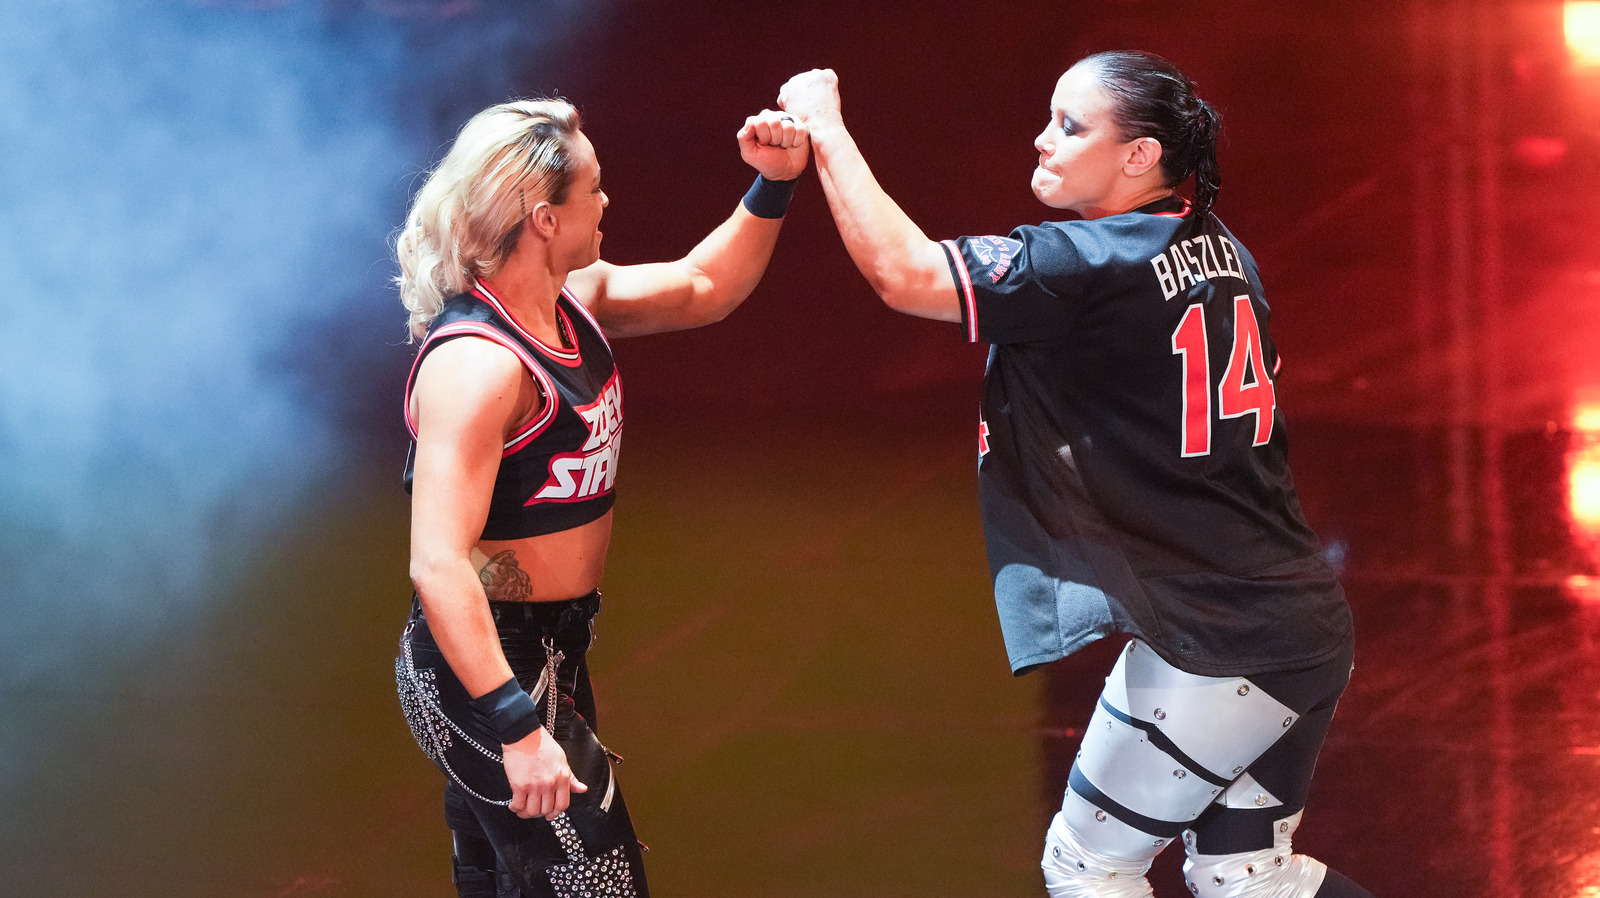 Shayna Baszler & Zoey Stark Vent Frustrations, Tease Changes After WWE Raw Losses